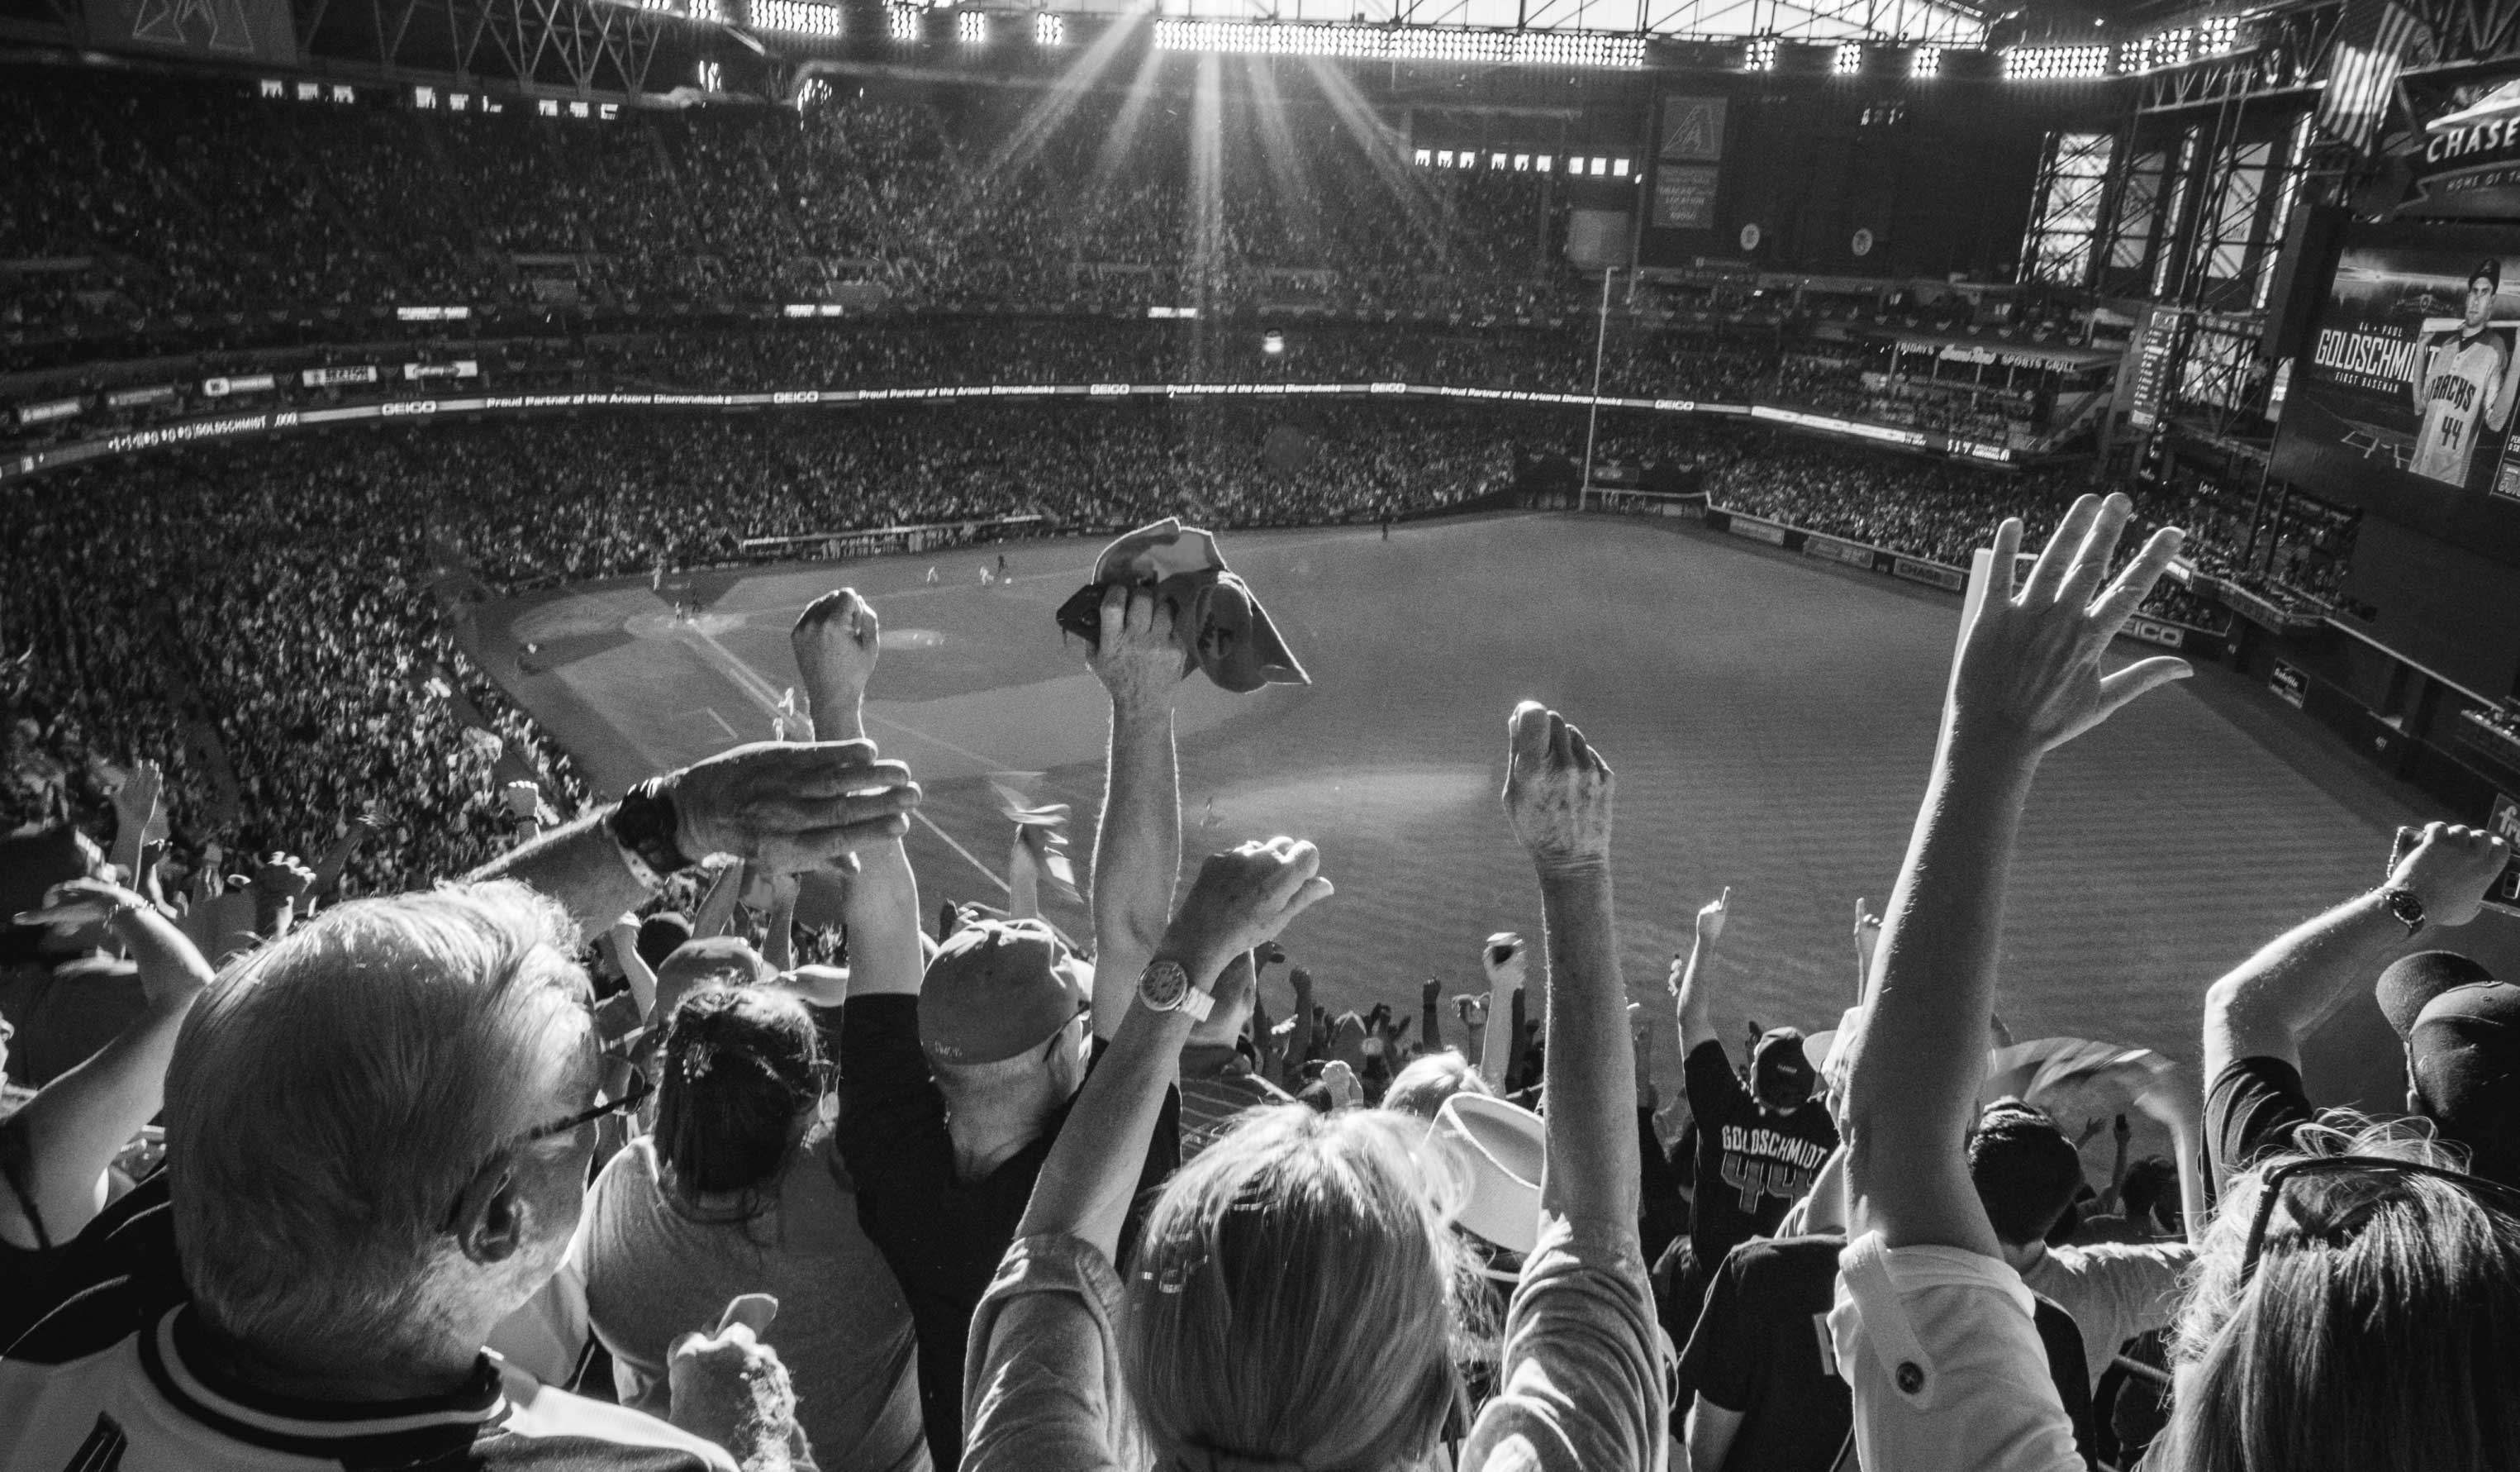 A crowd of people cheer at a baseball stadium